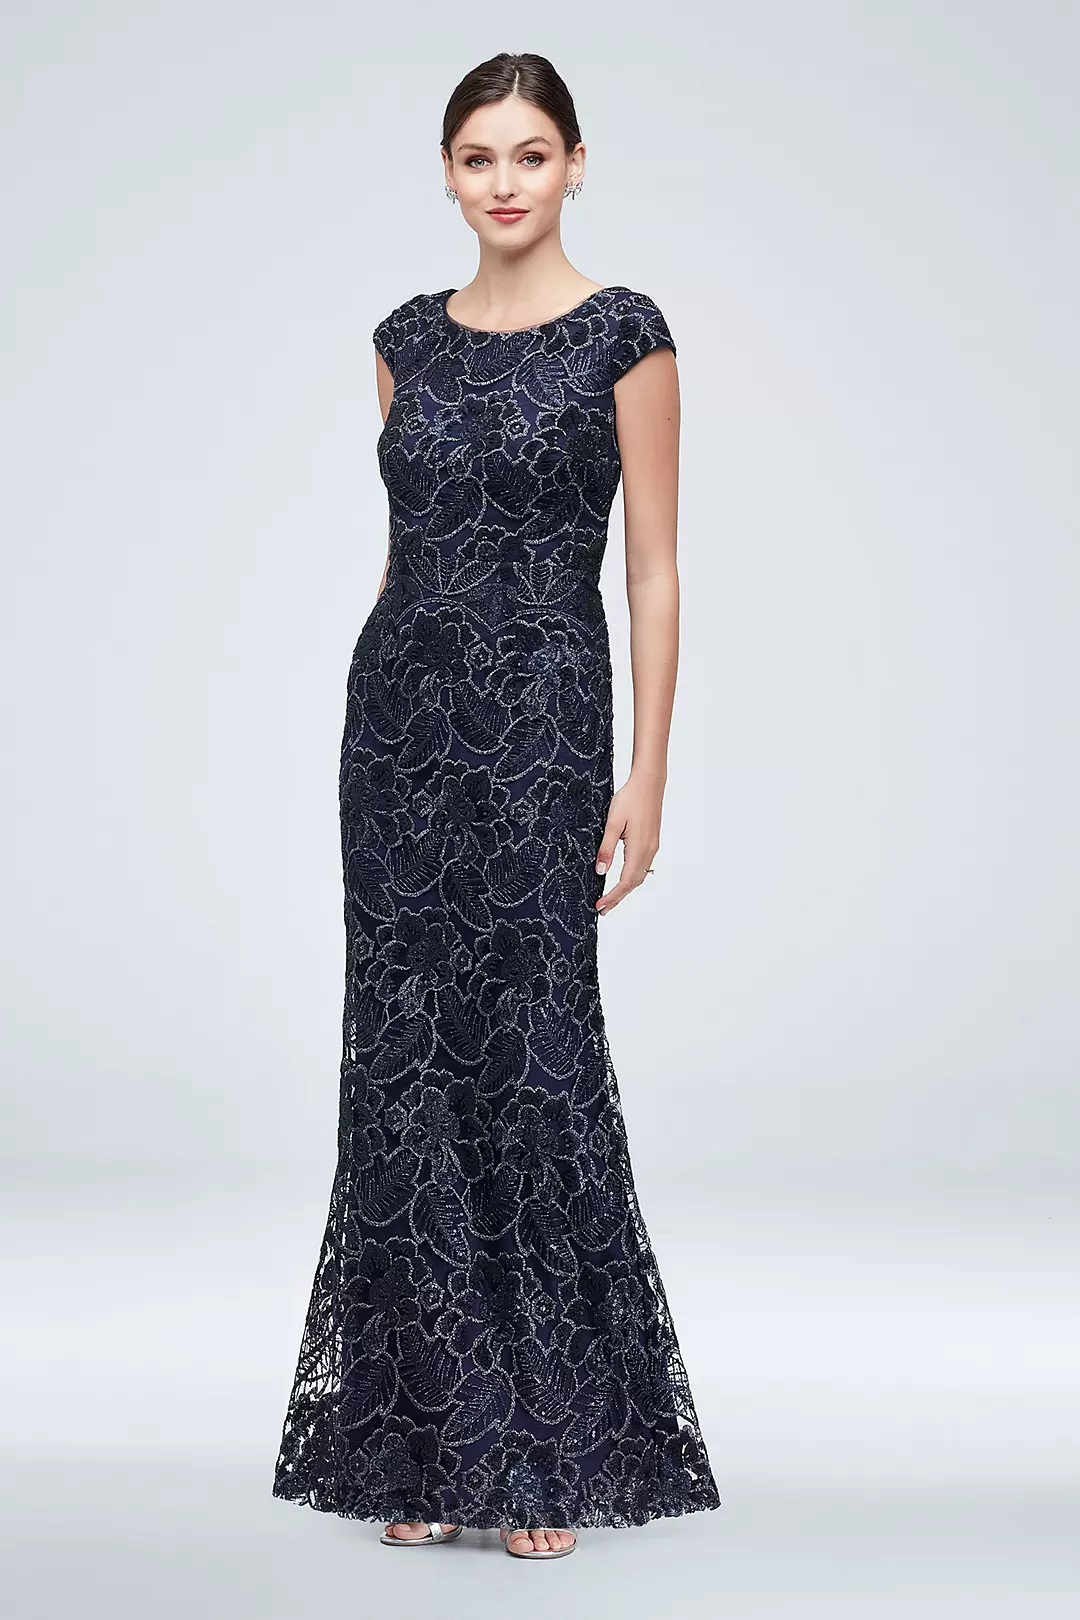 Sequin Floral Lace Overlay Cap Sleeve Gown Image